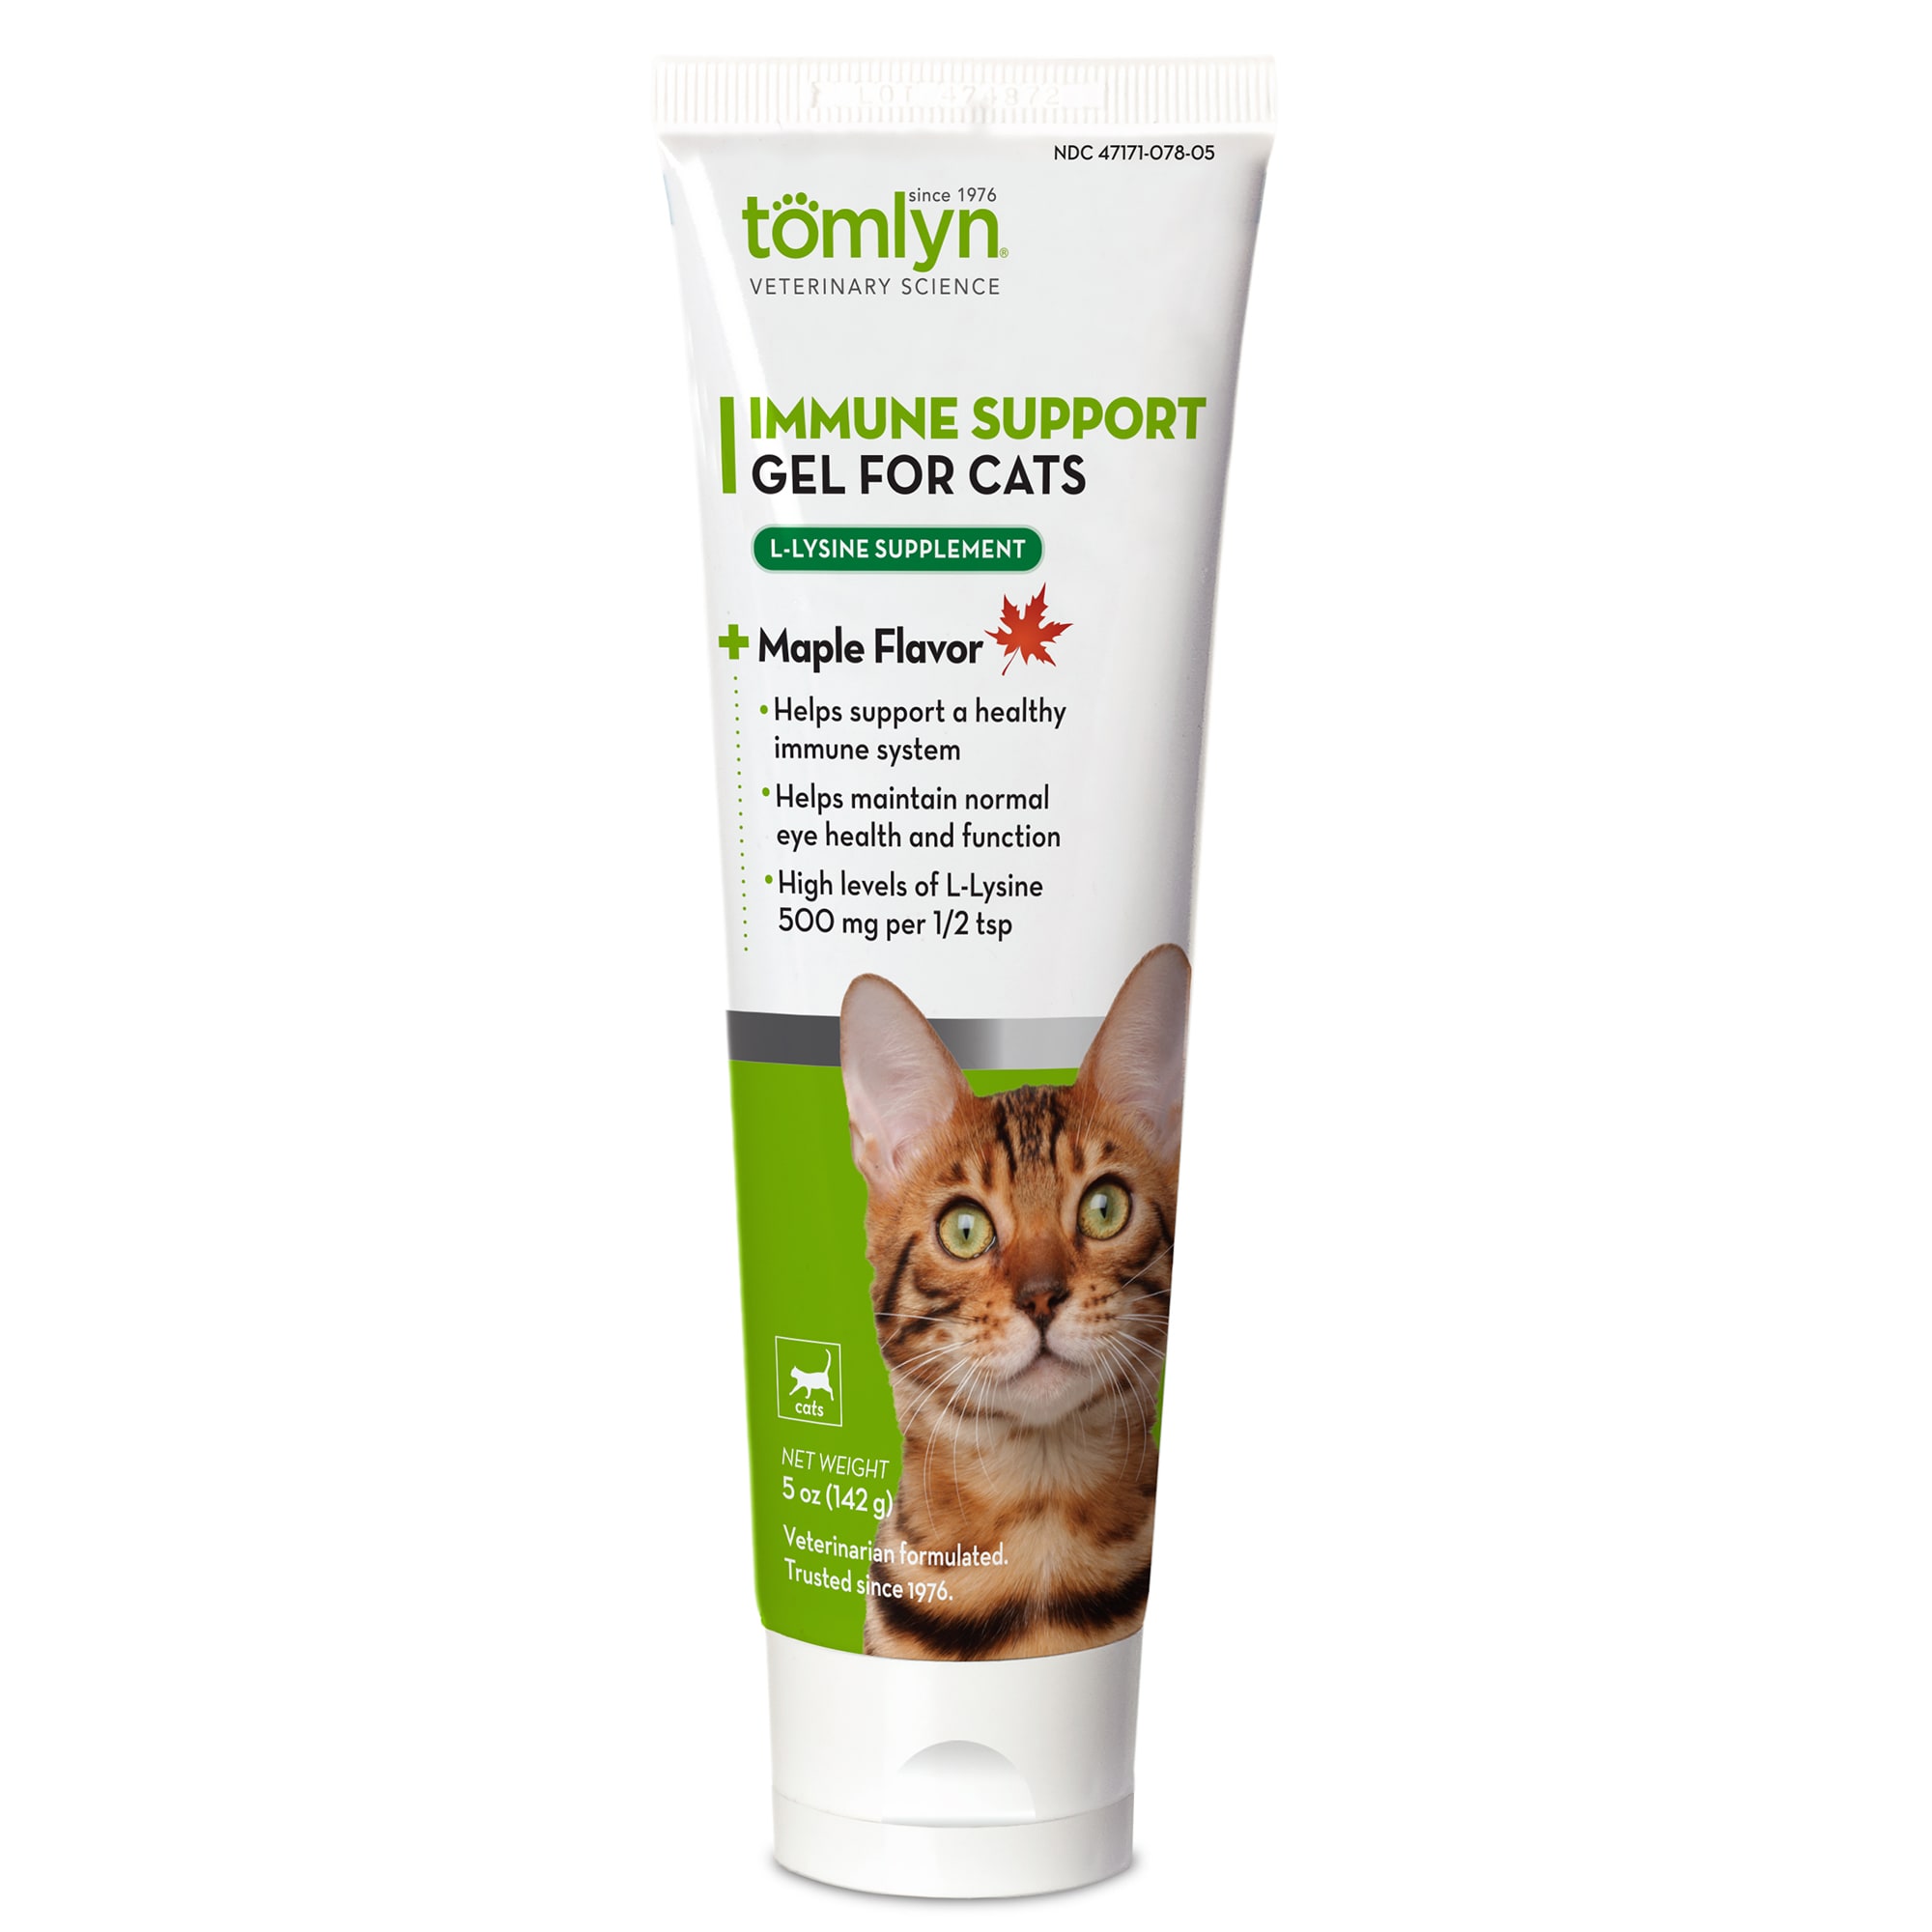 Tomlyn Immune Support L-Lysine for Cats 5oz - 030521005222